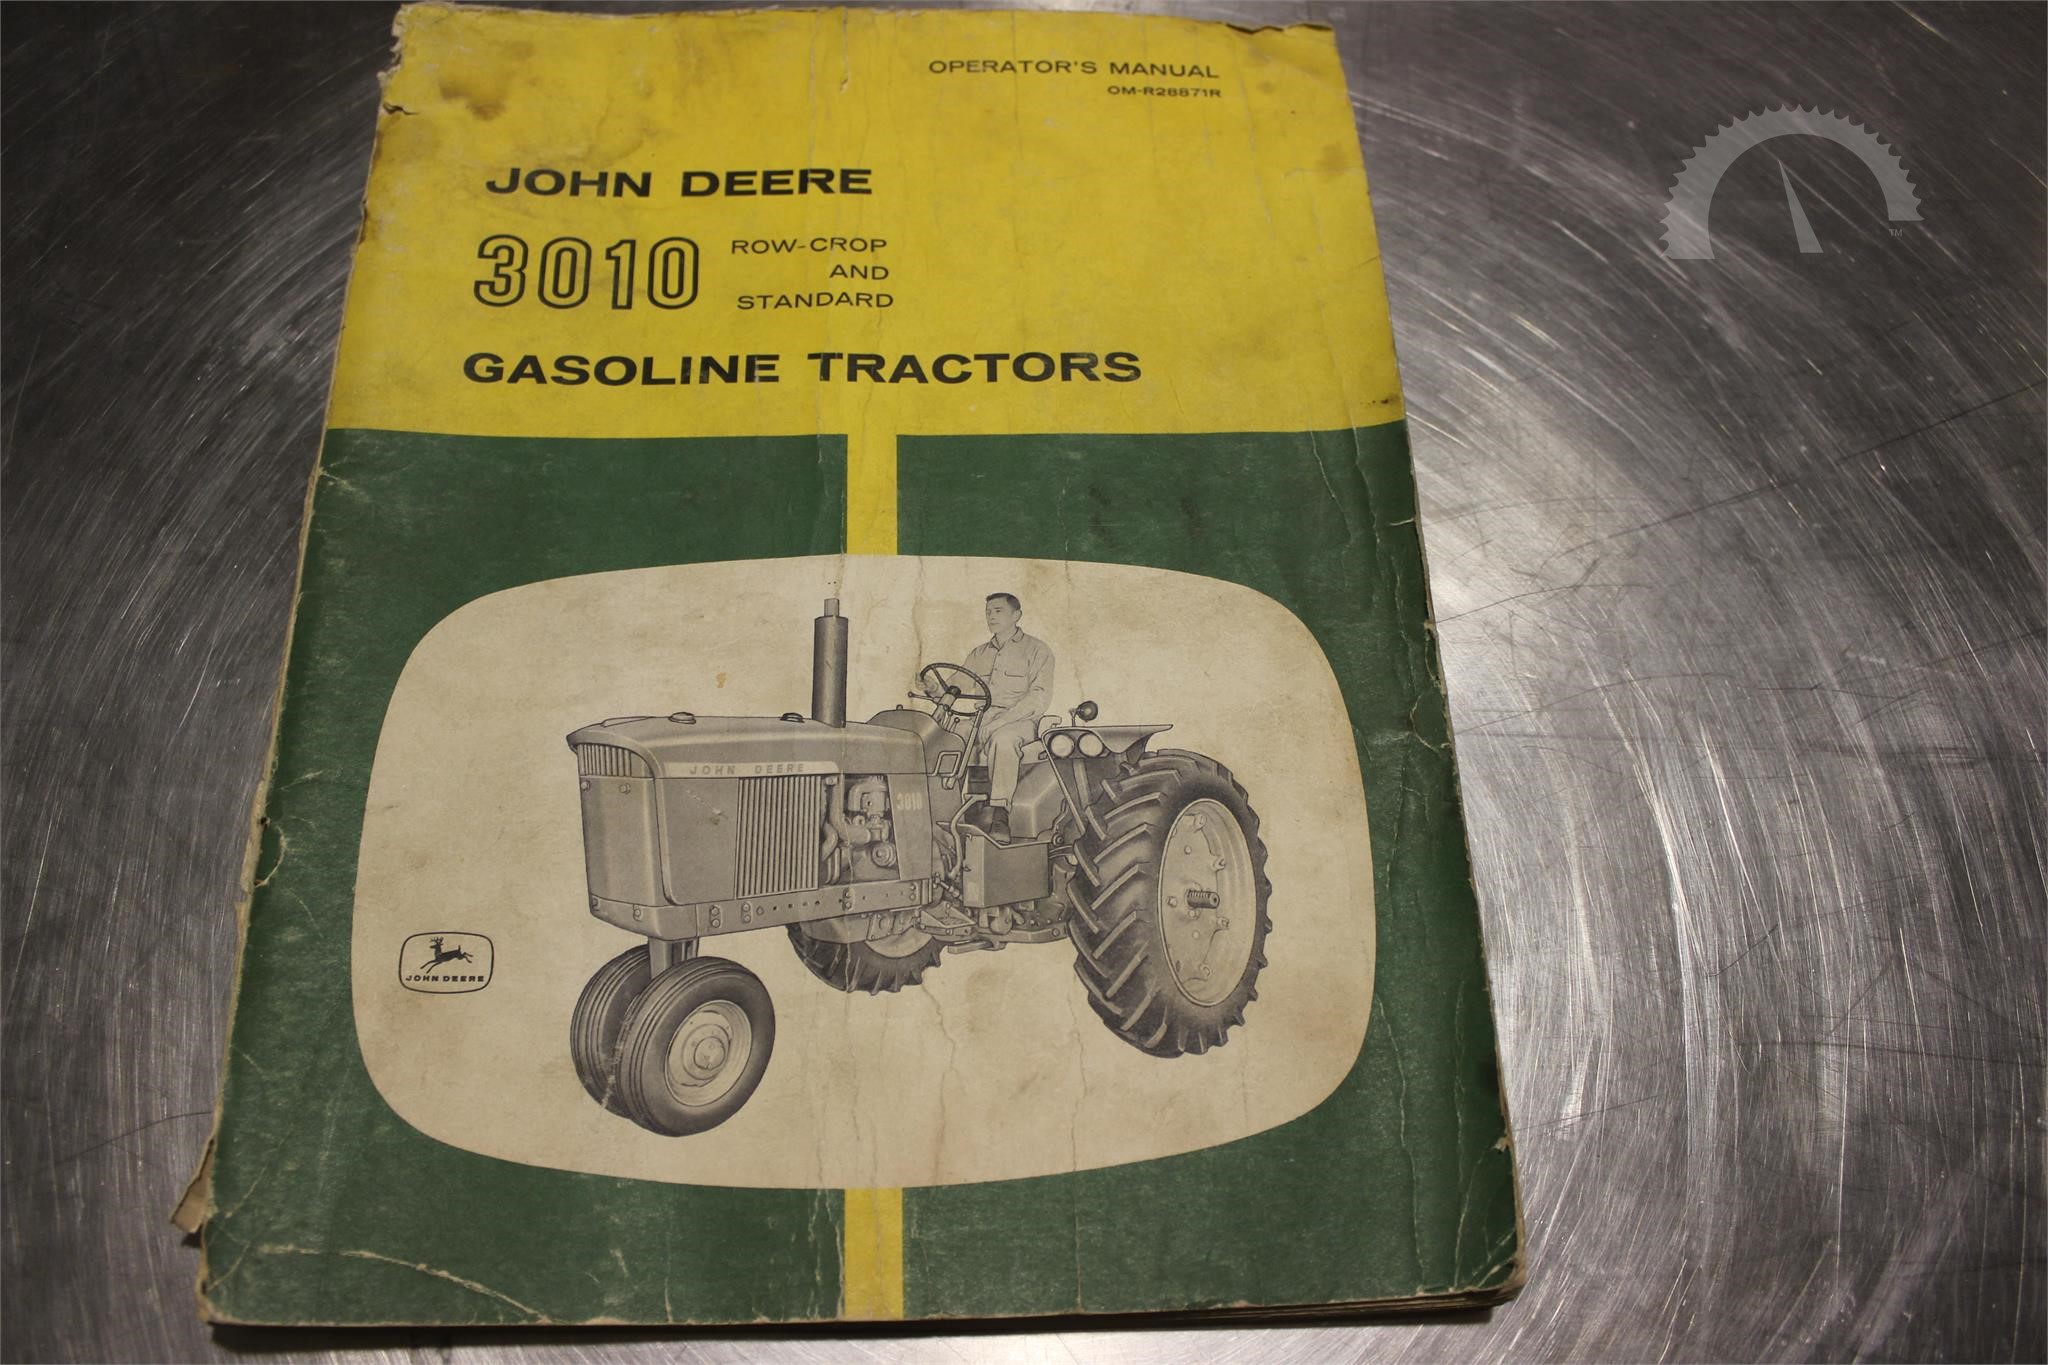 Zetor Tractor Various Model Manuals see listing 28 manuals PDF on CD 